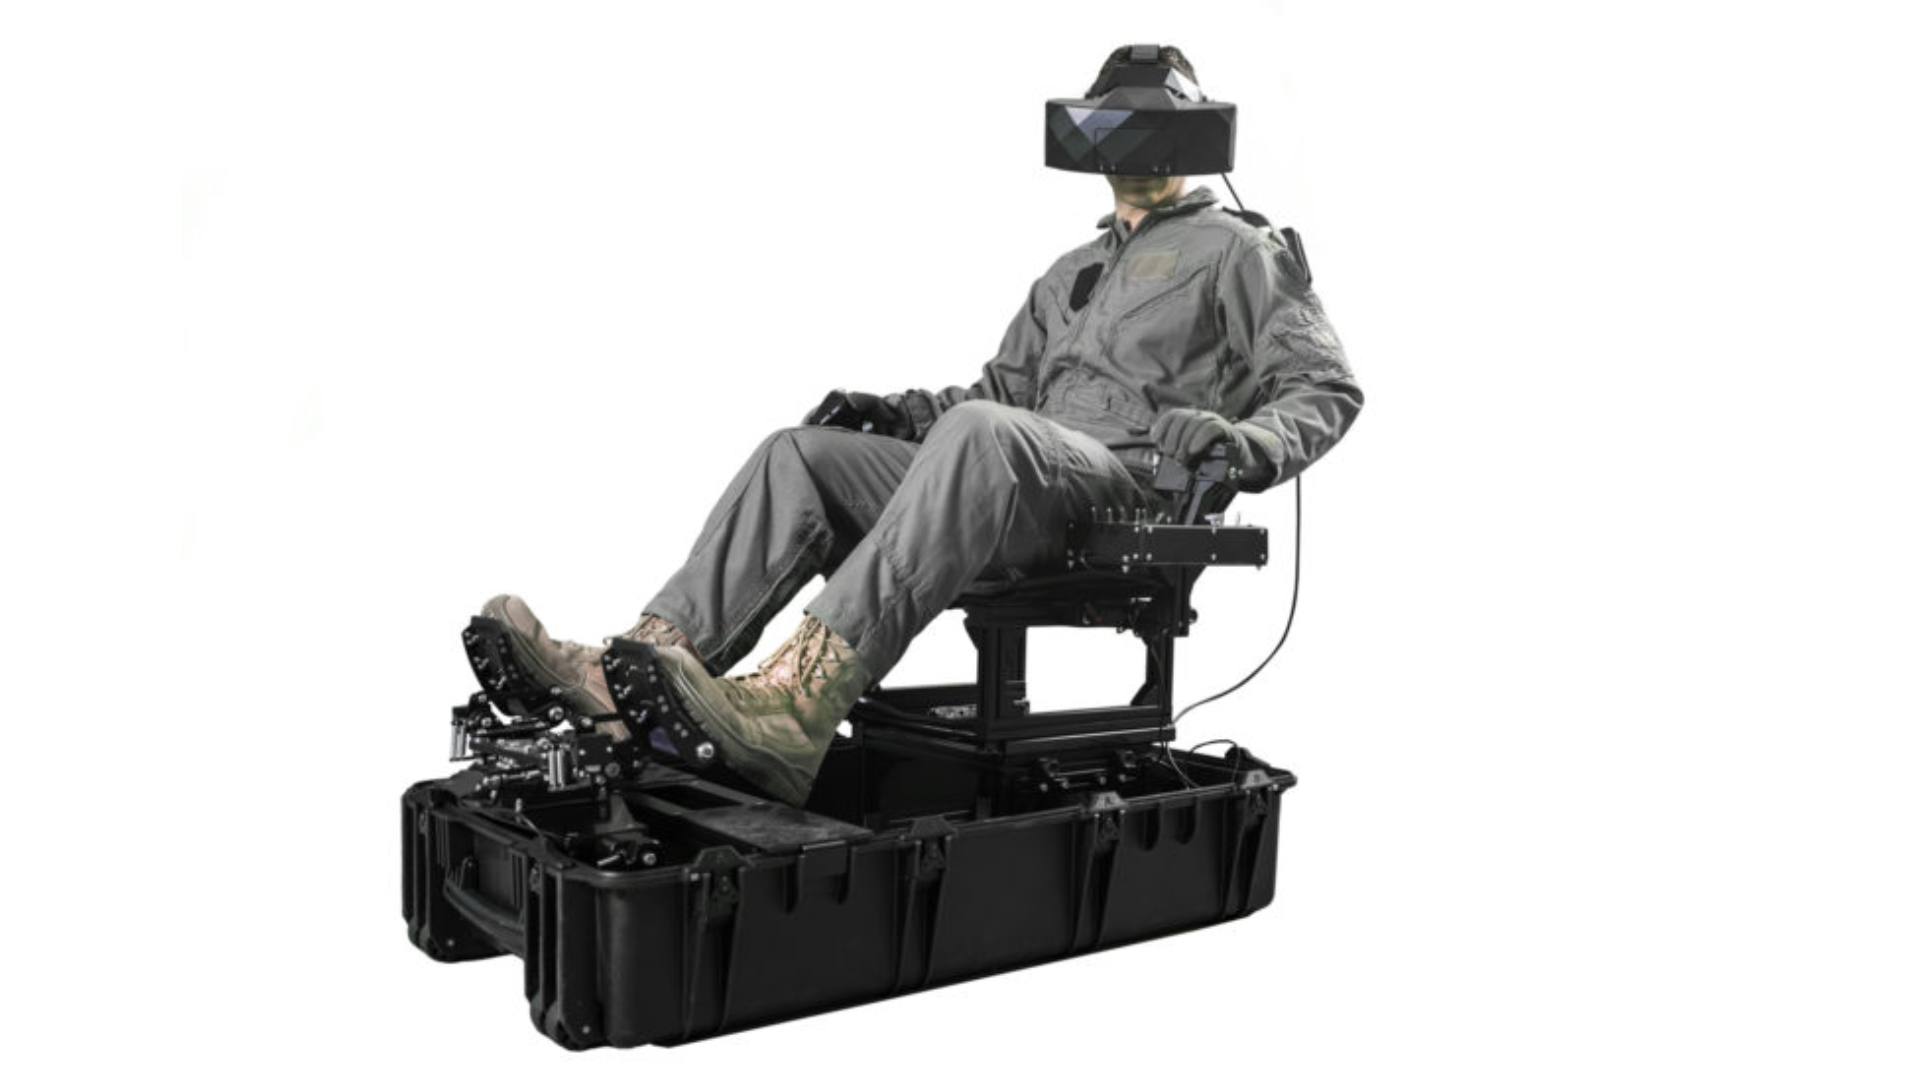 This virtual reality flight simulator fits in a suitcase